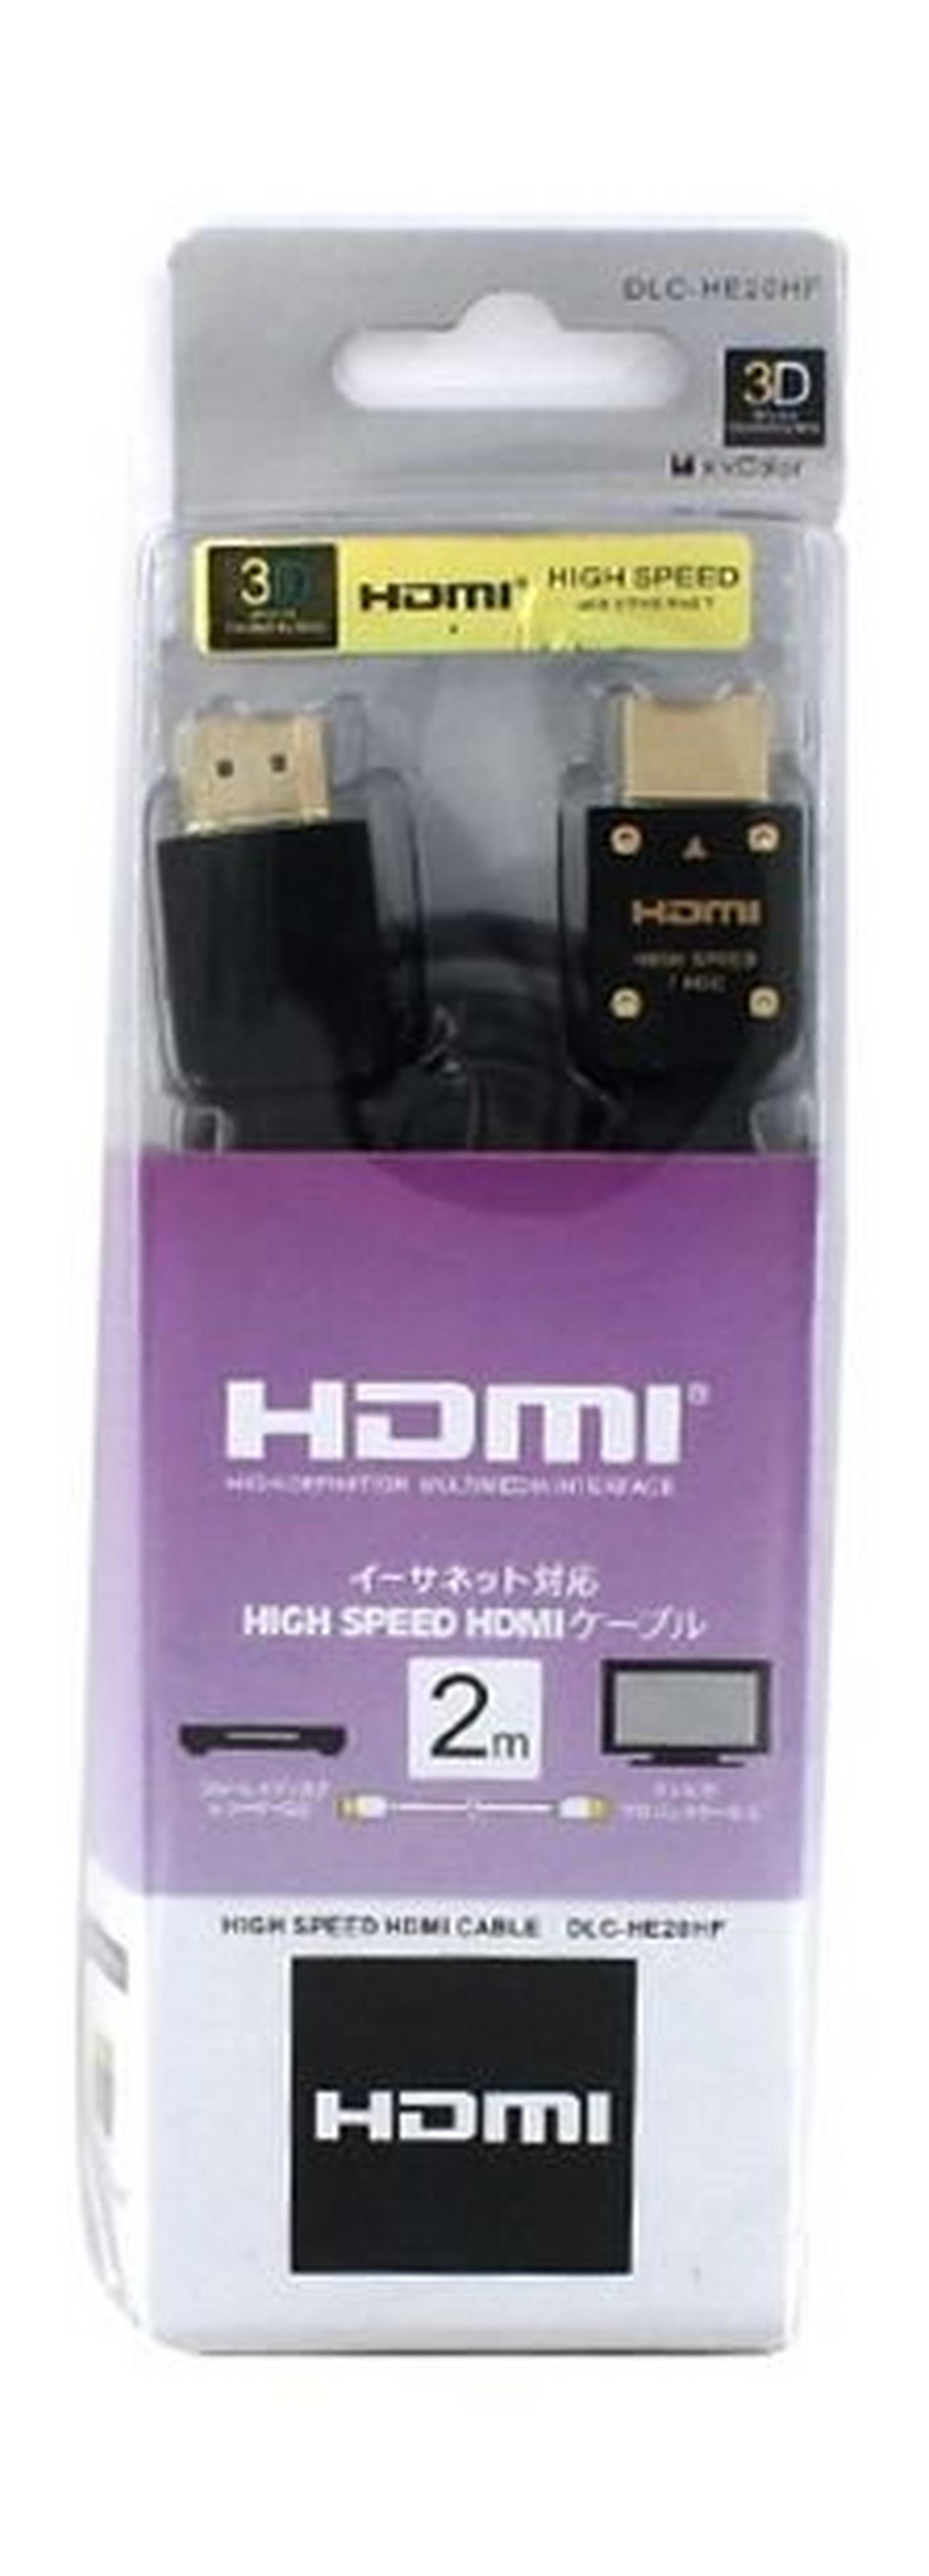 High Speed HDMI Cable 2M - Black